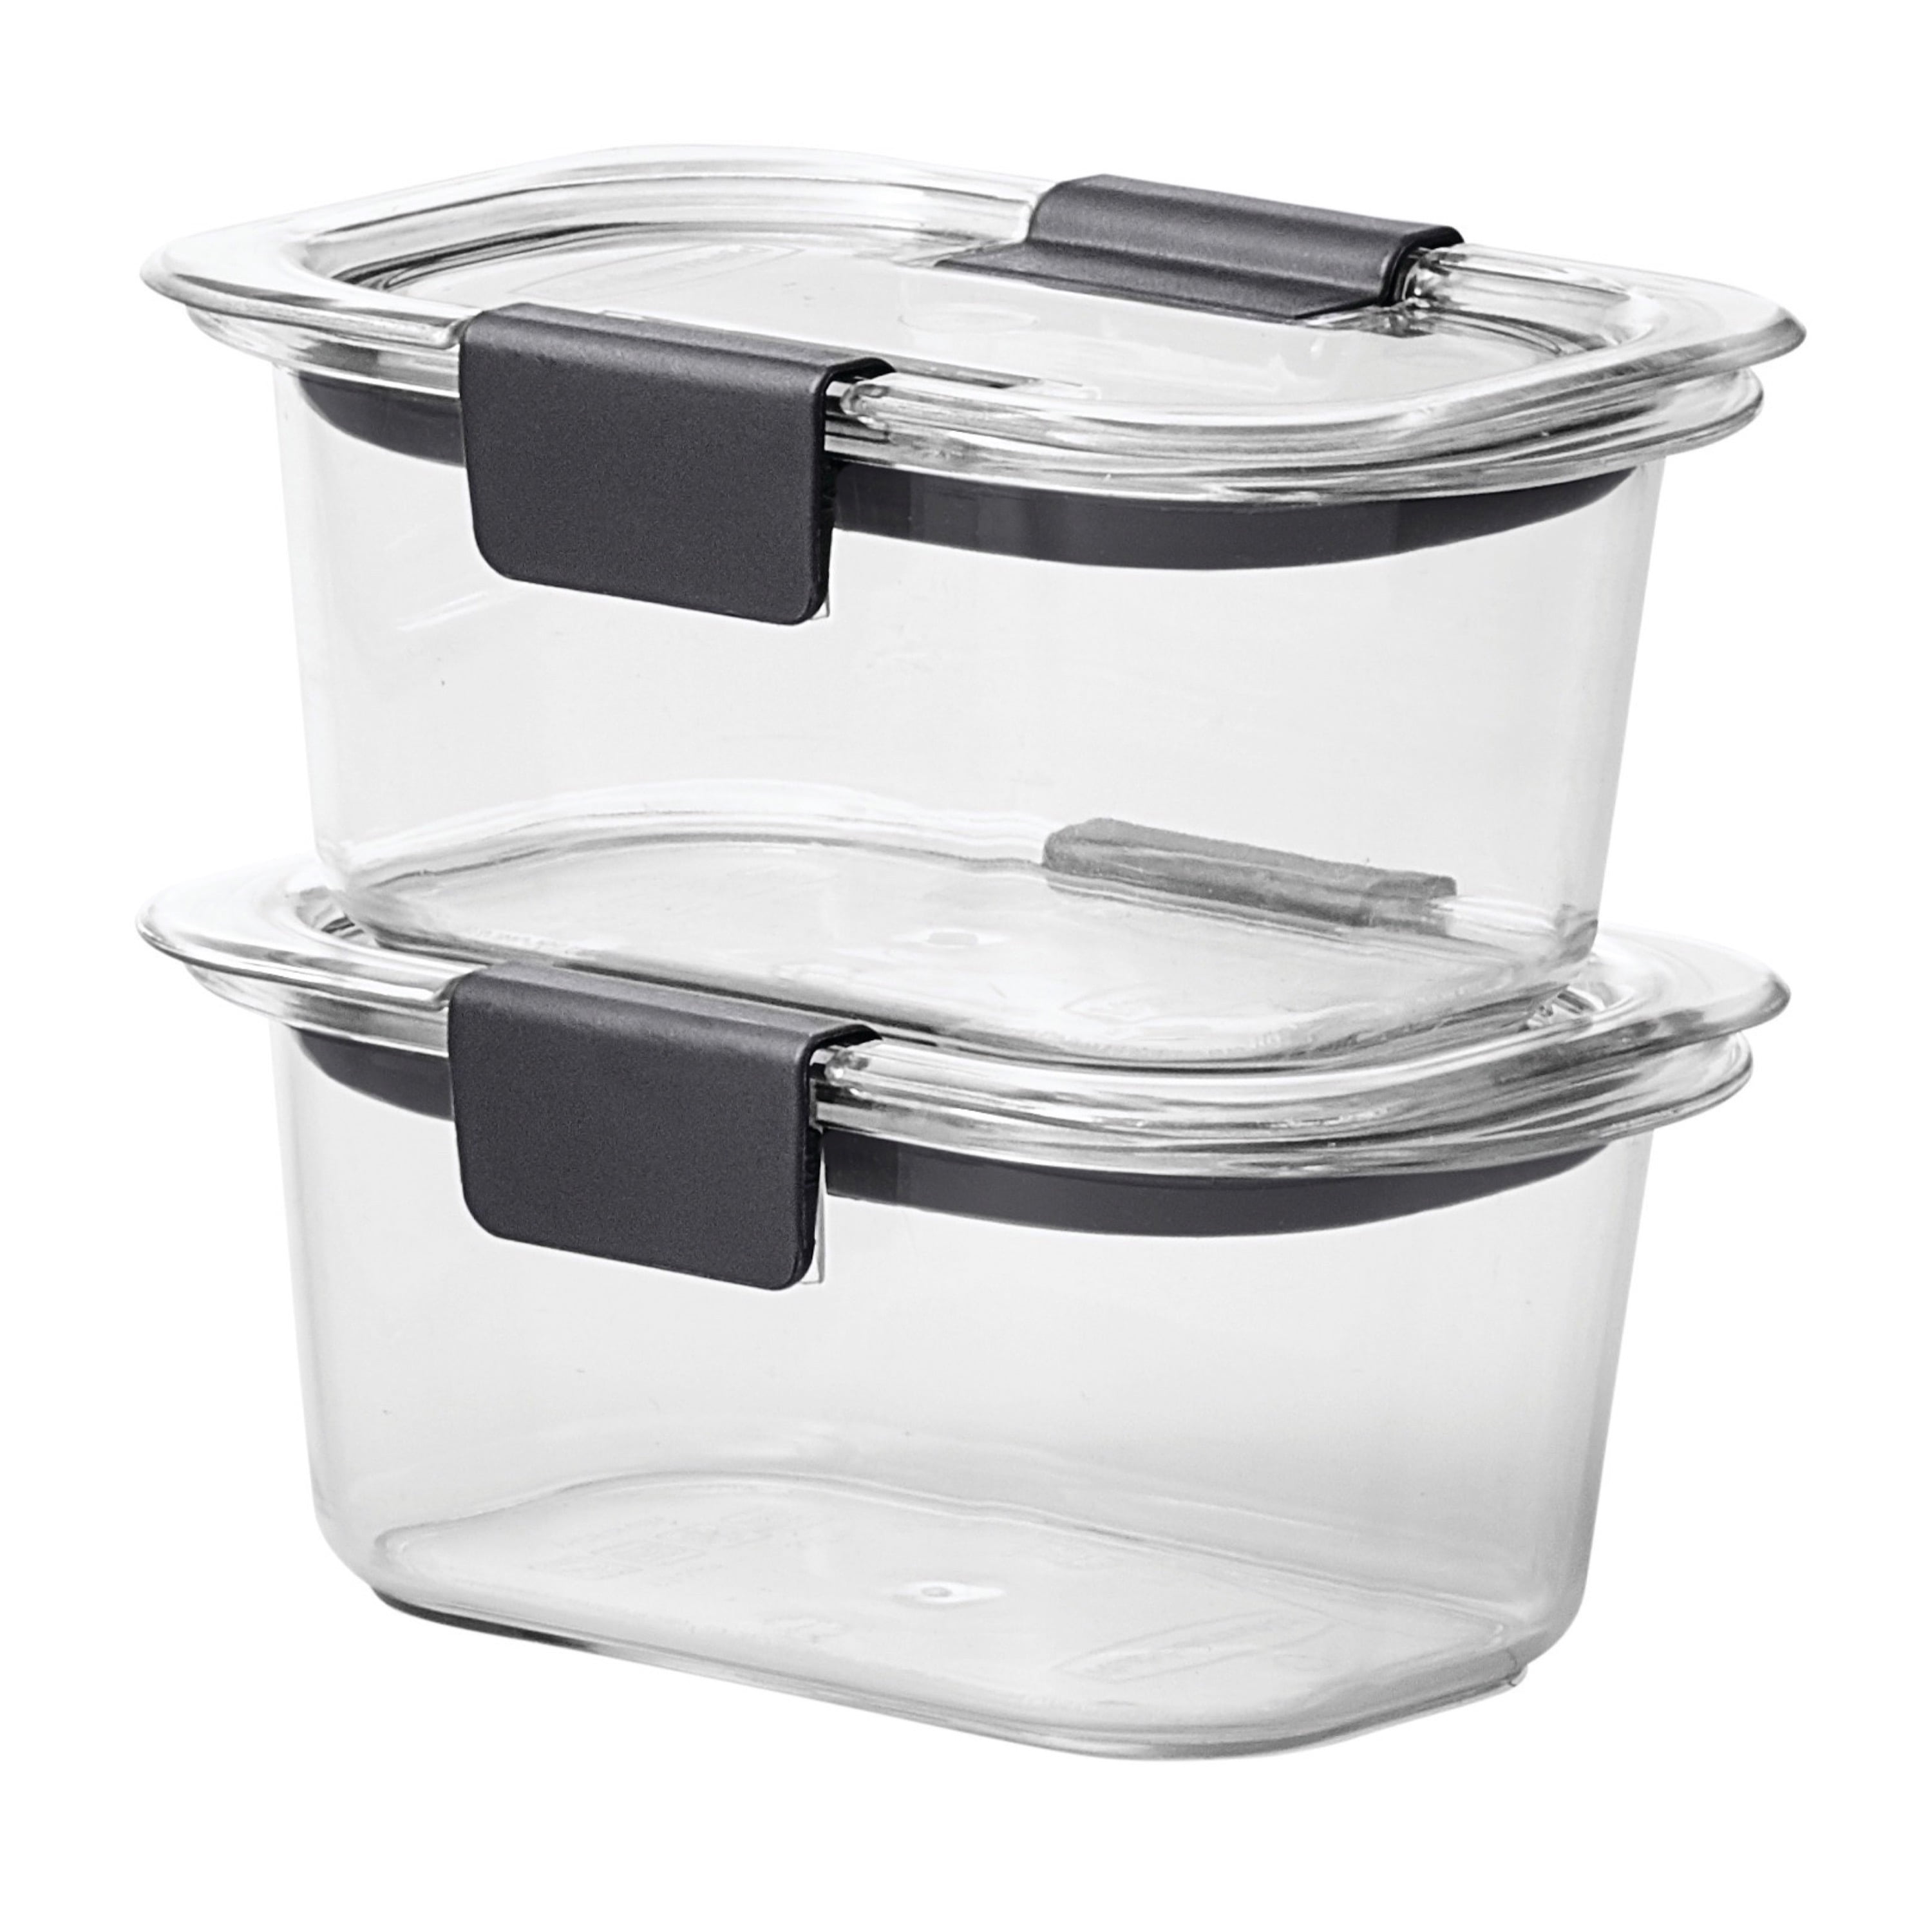 Rubbermaid Brilliance 1.3 Cup Stain-Proof Food Storage Container